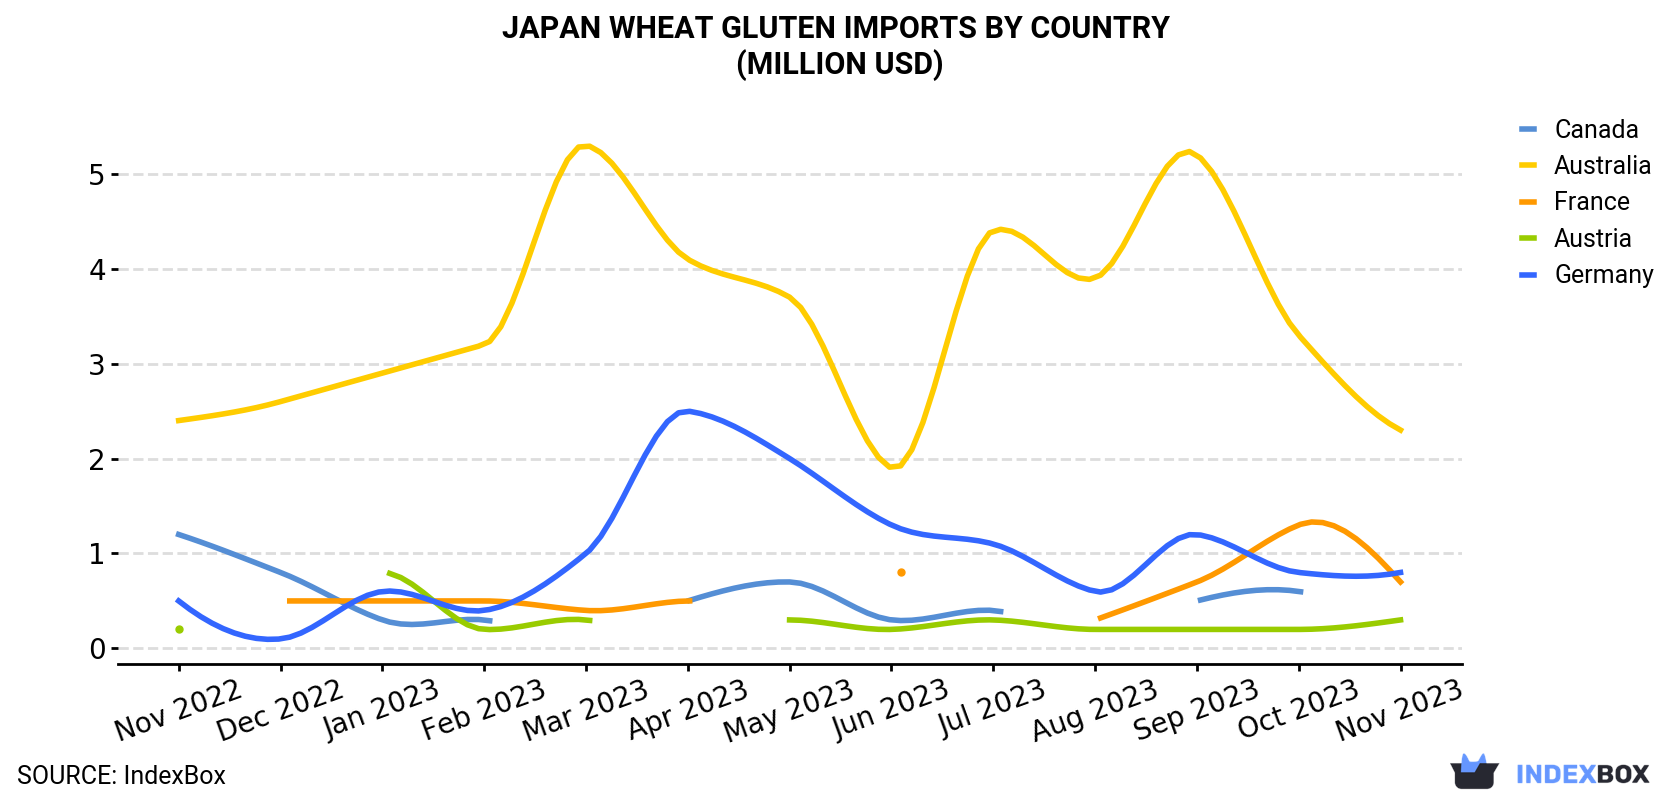 Japan Wheat Gluten Imports By Country (Million USD)